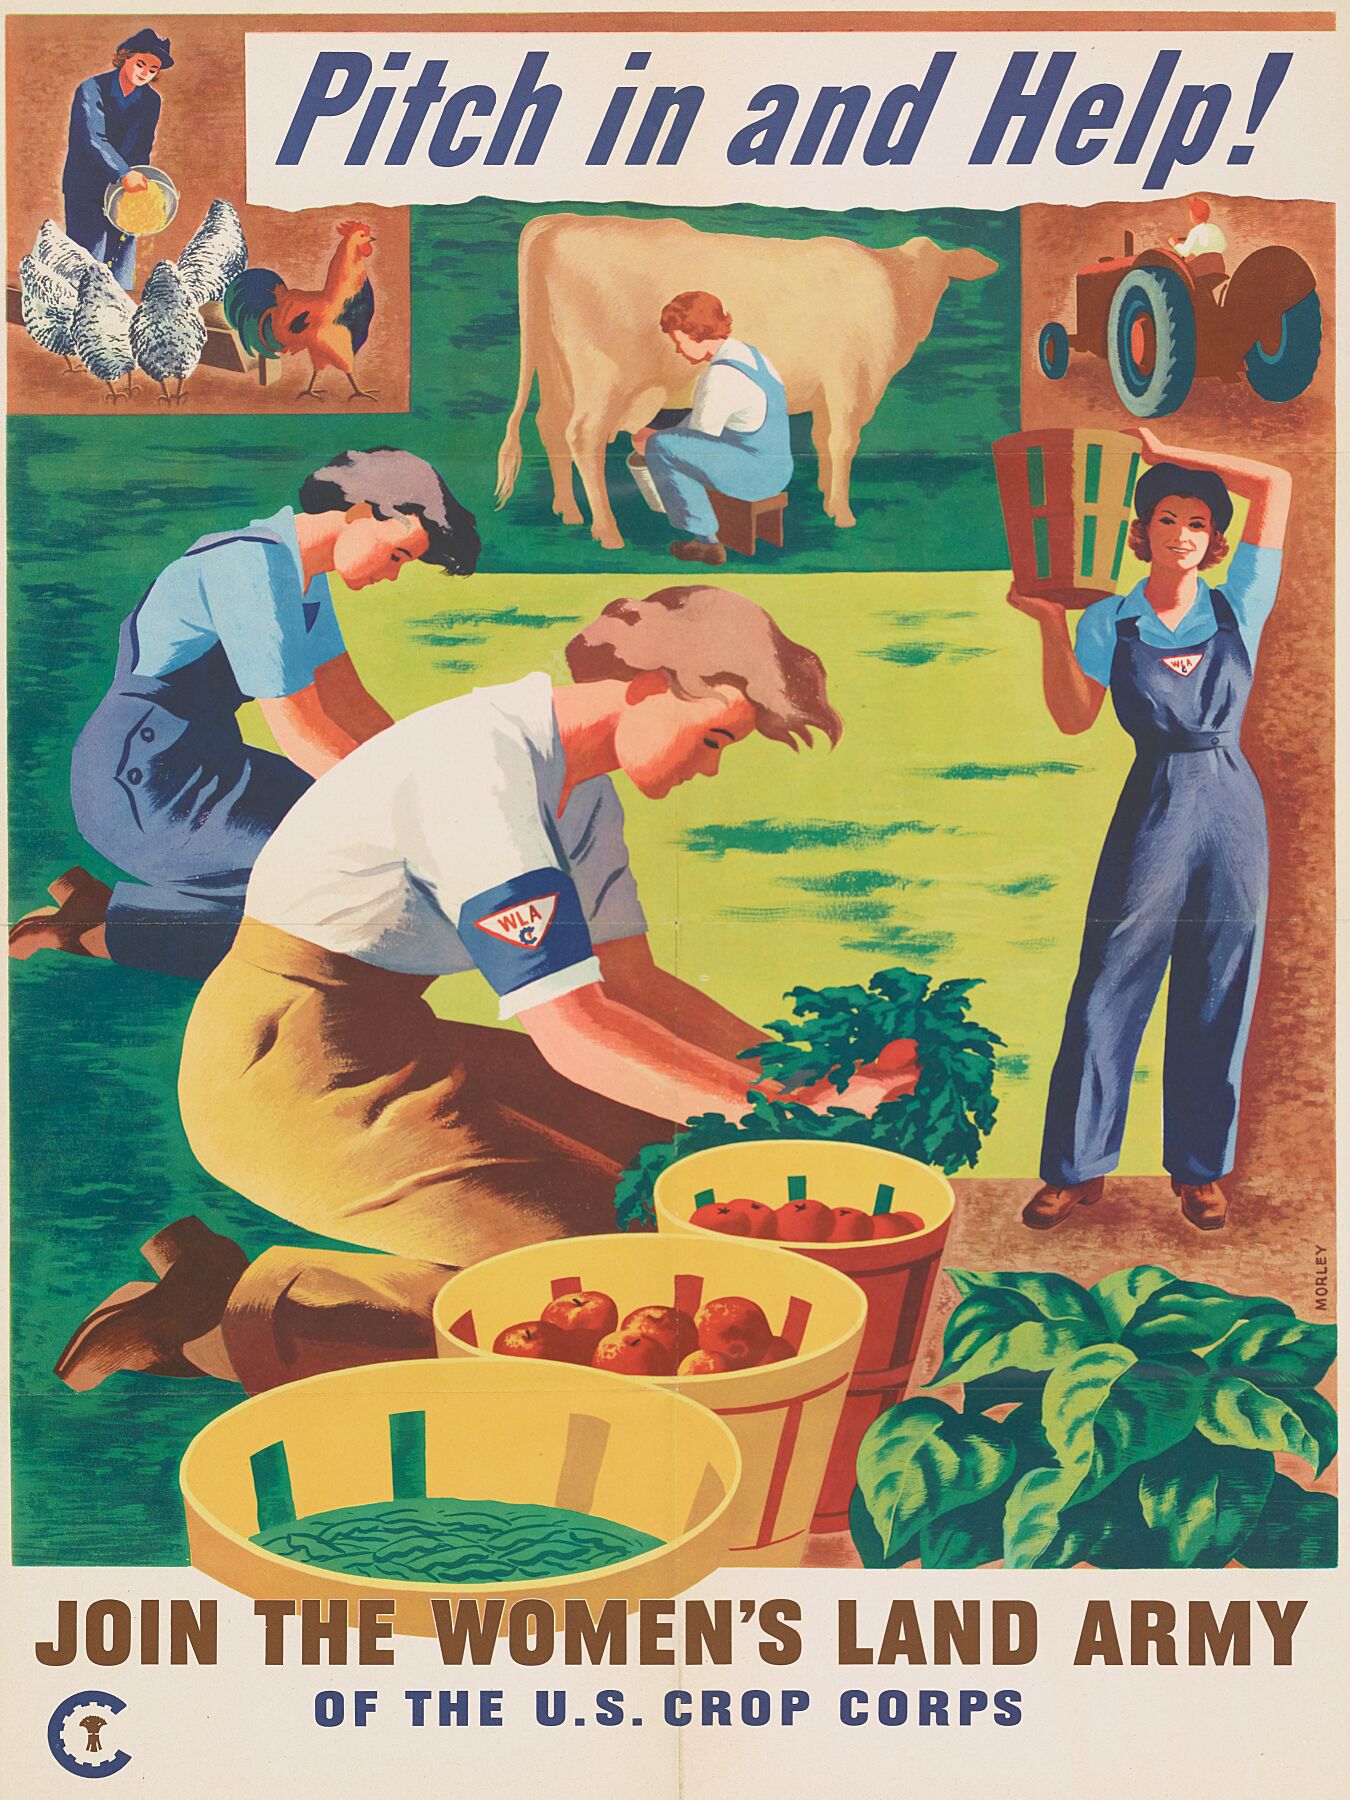 Pitch in and help! join the Women's Land Army of the U.S. Crop Corps by Morley, Hubert  Publication date 1944